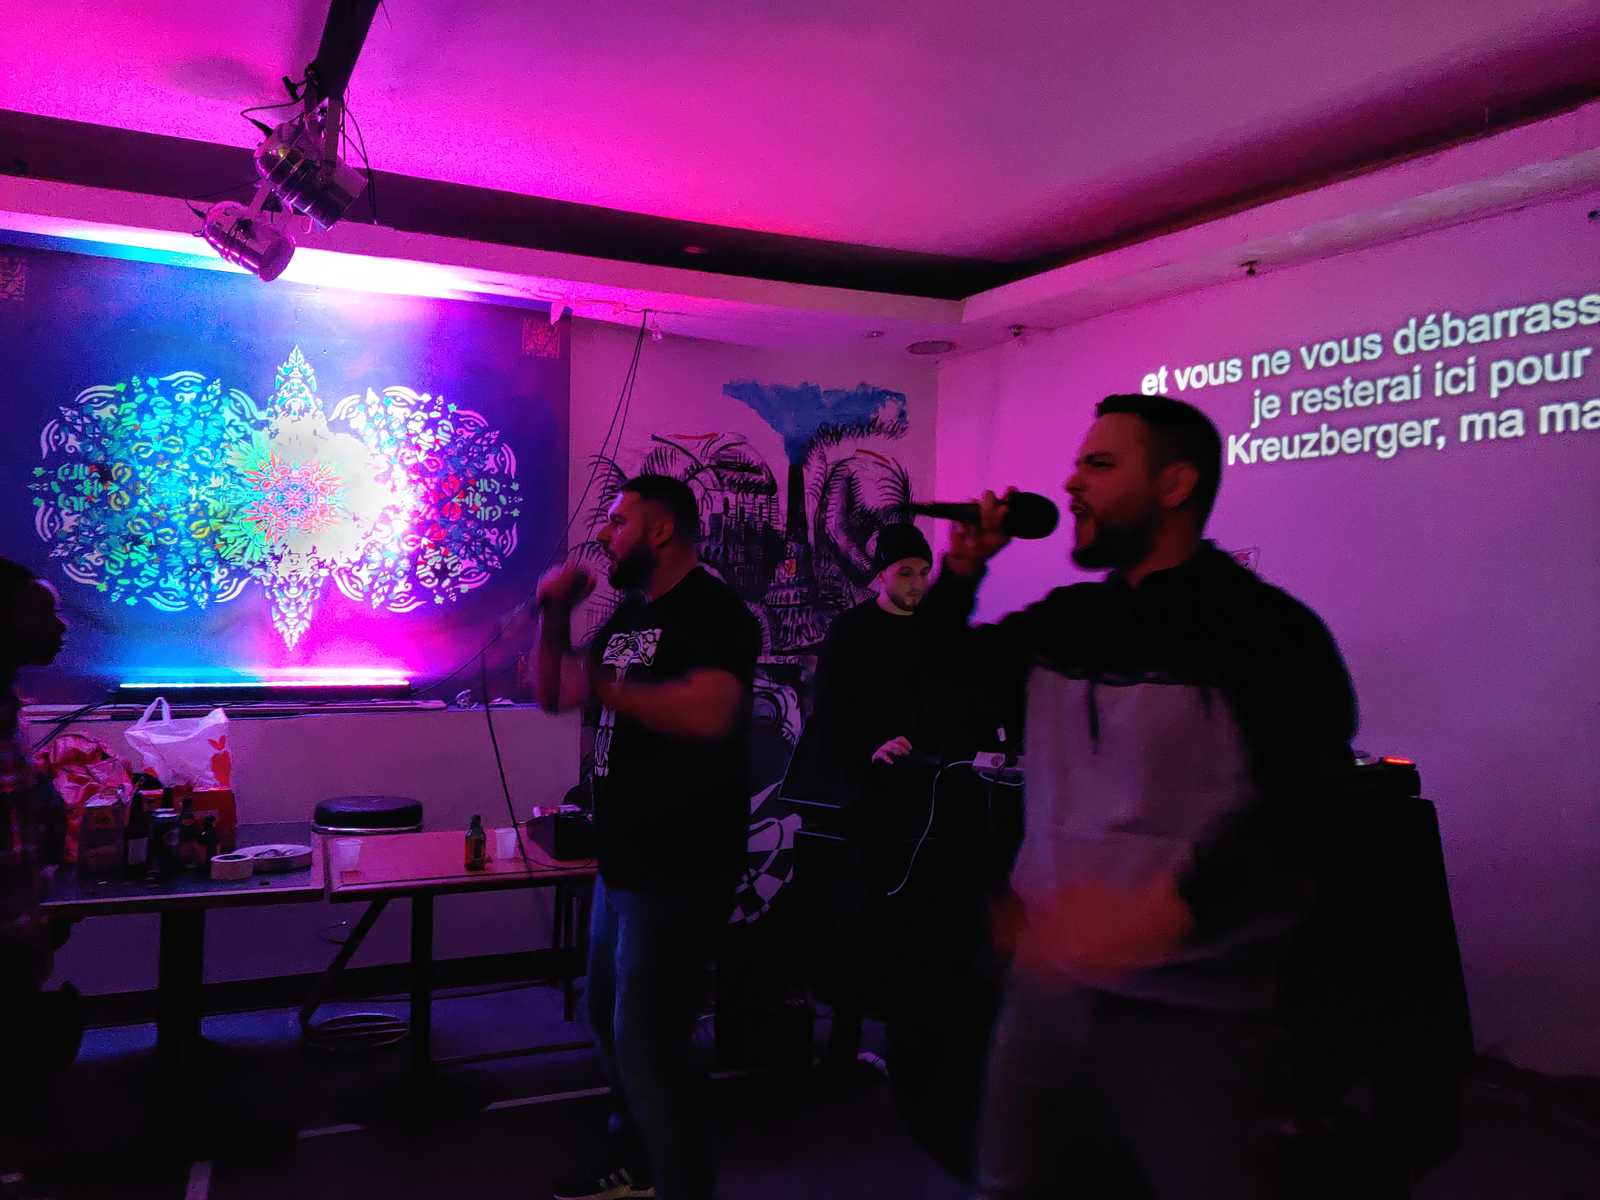 The german Rapper PTK performing in the Aubergine 3000. Behind the translations of his lyrics made by Urbanauth can be percieved, while on the left side a fractalic urban art design by Erwa.One is illuminated in different lights.